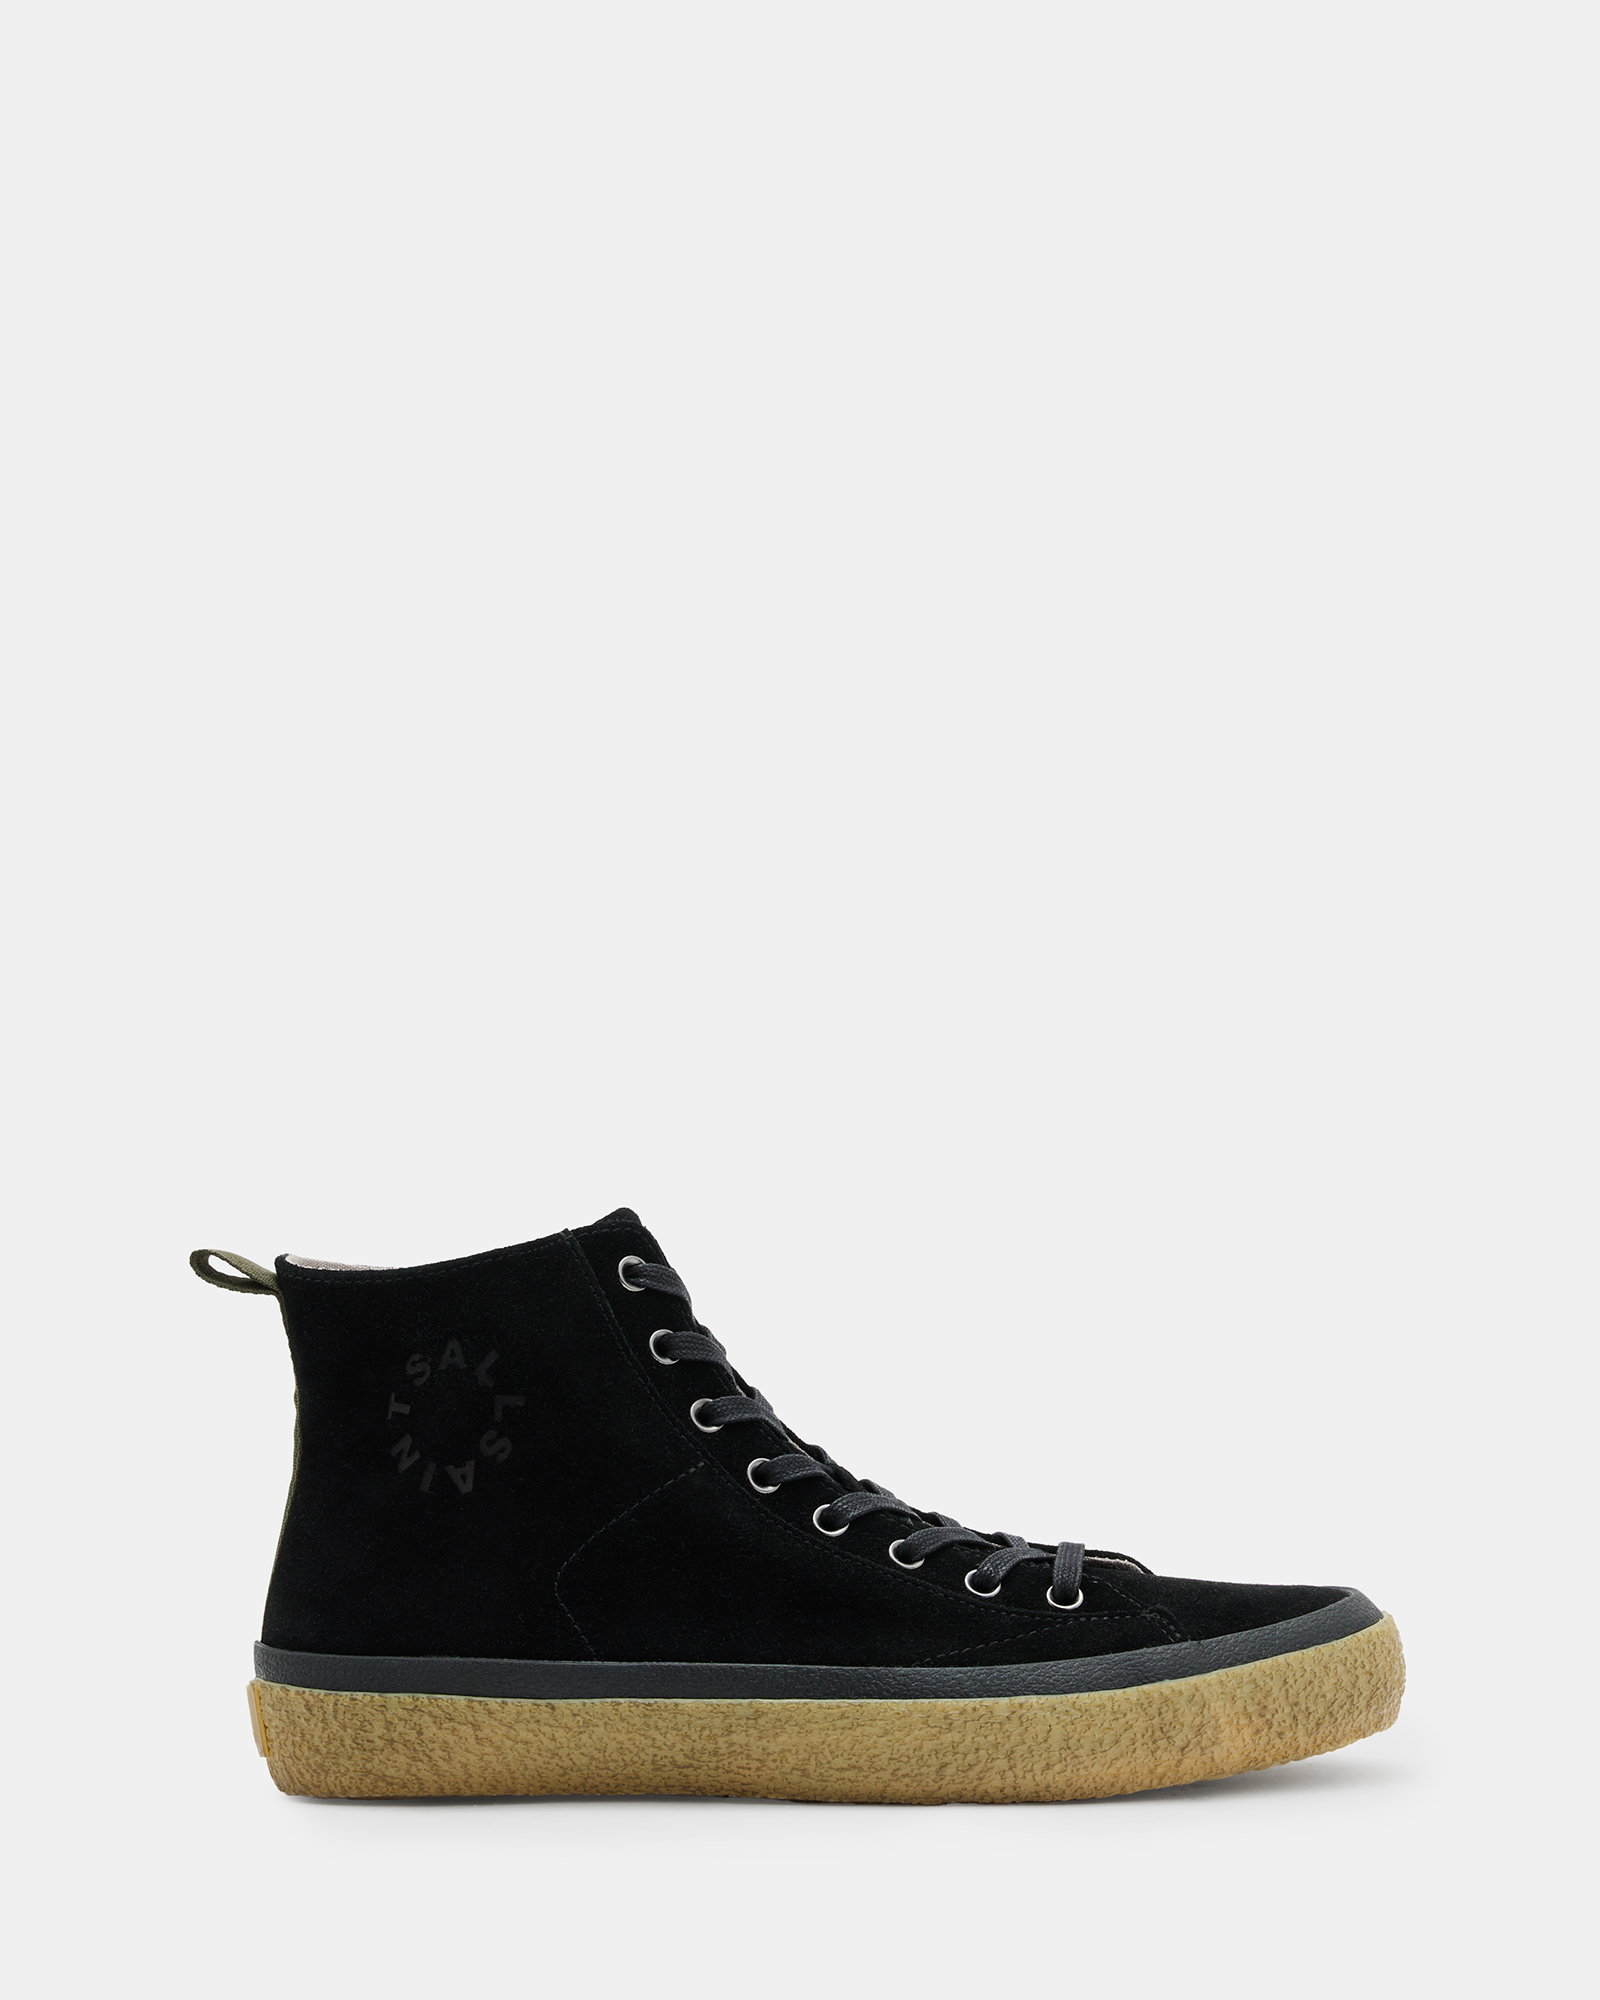 Allsaints Crister Logo Leather High Top Sneakers In Black